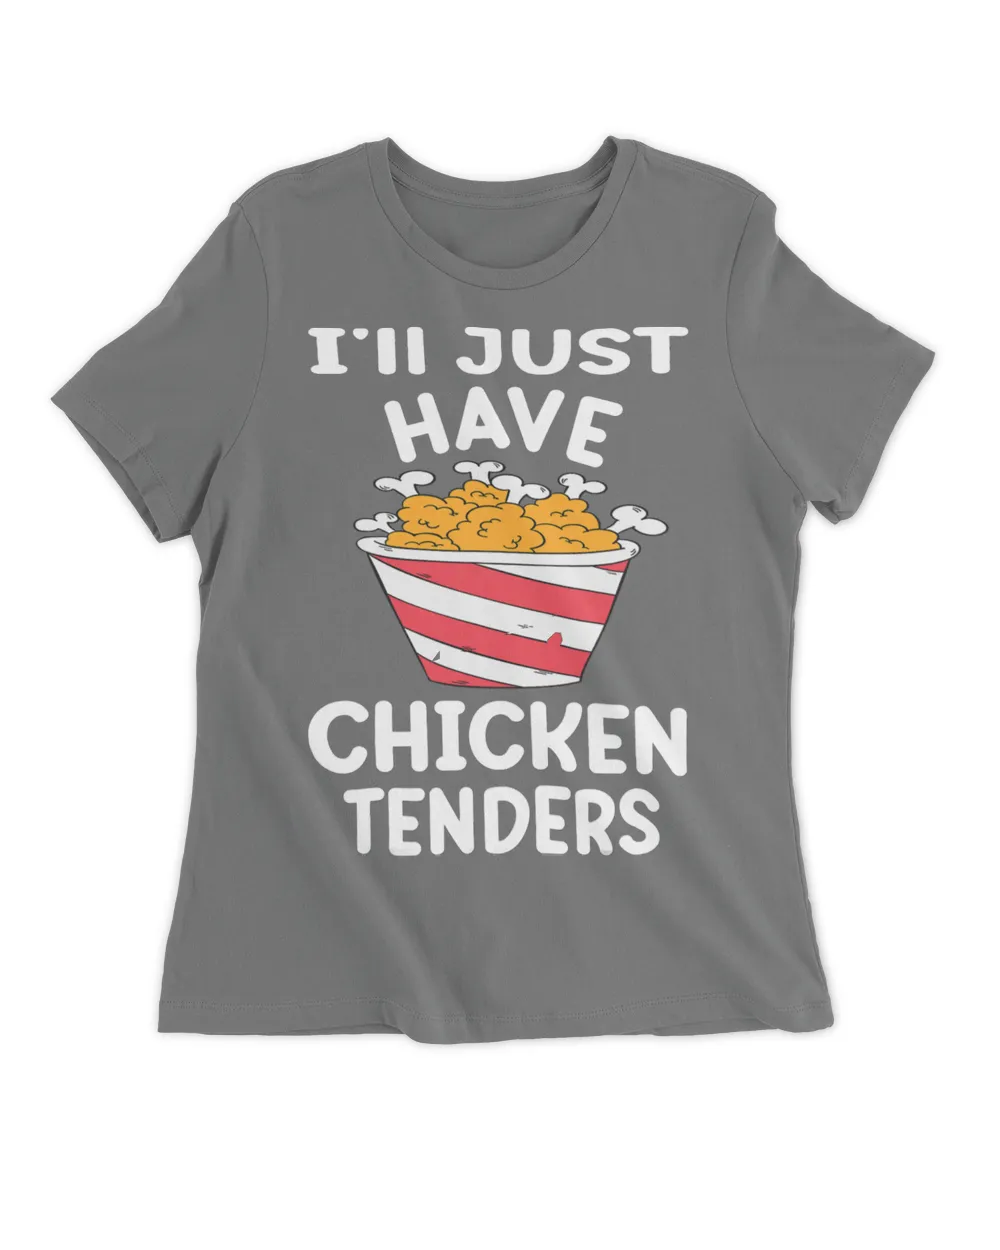 Ill Just Have The Chicken Tenders Funny Gag 22